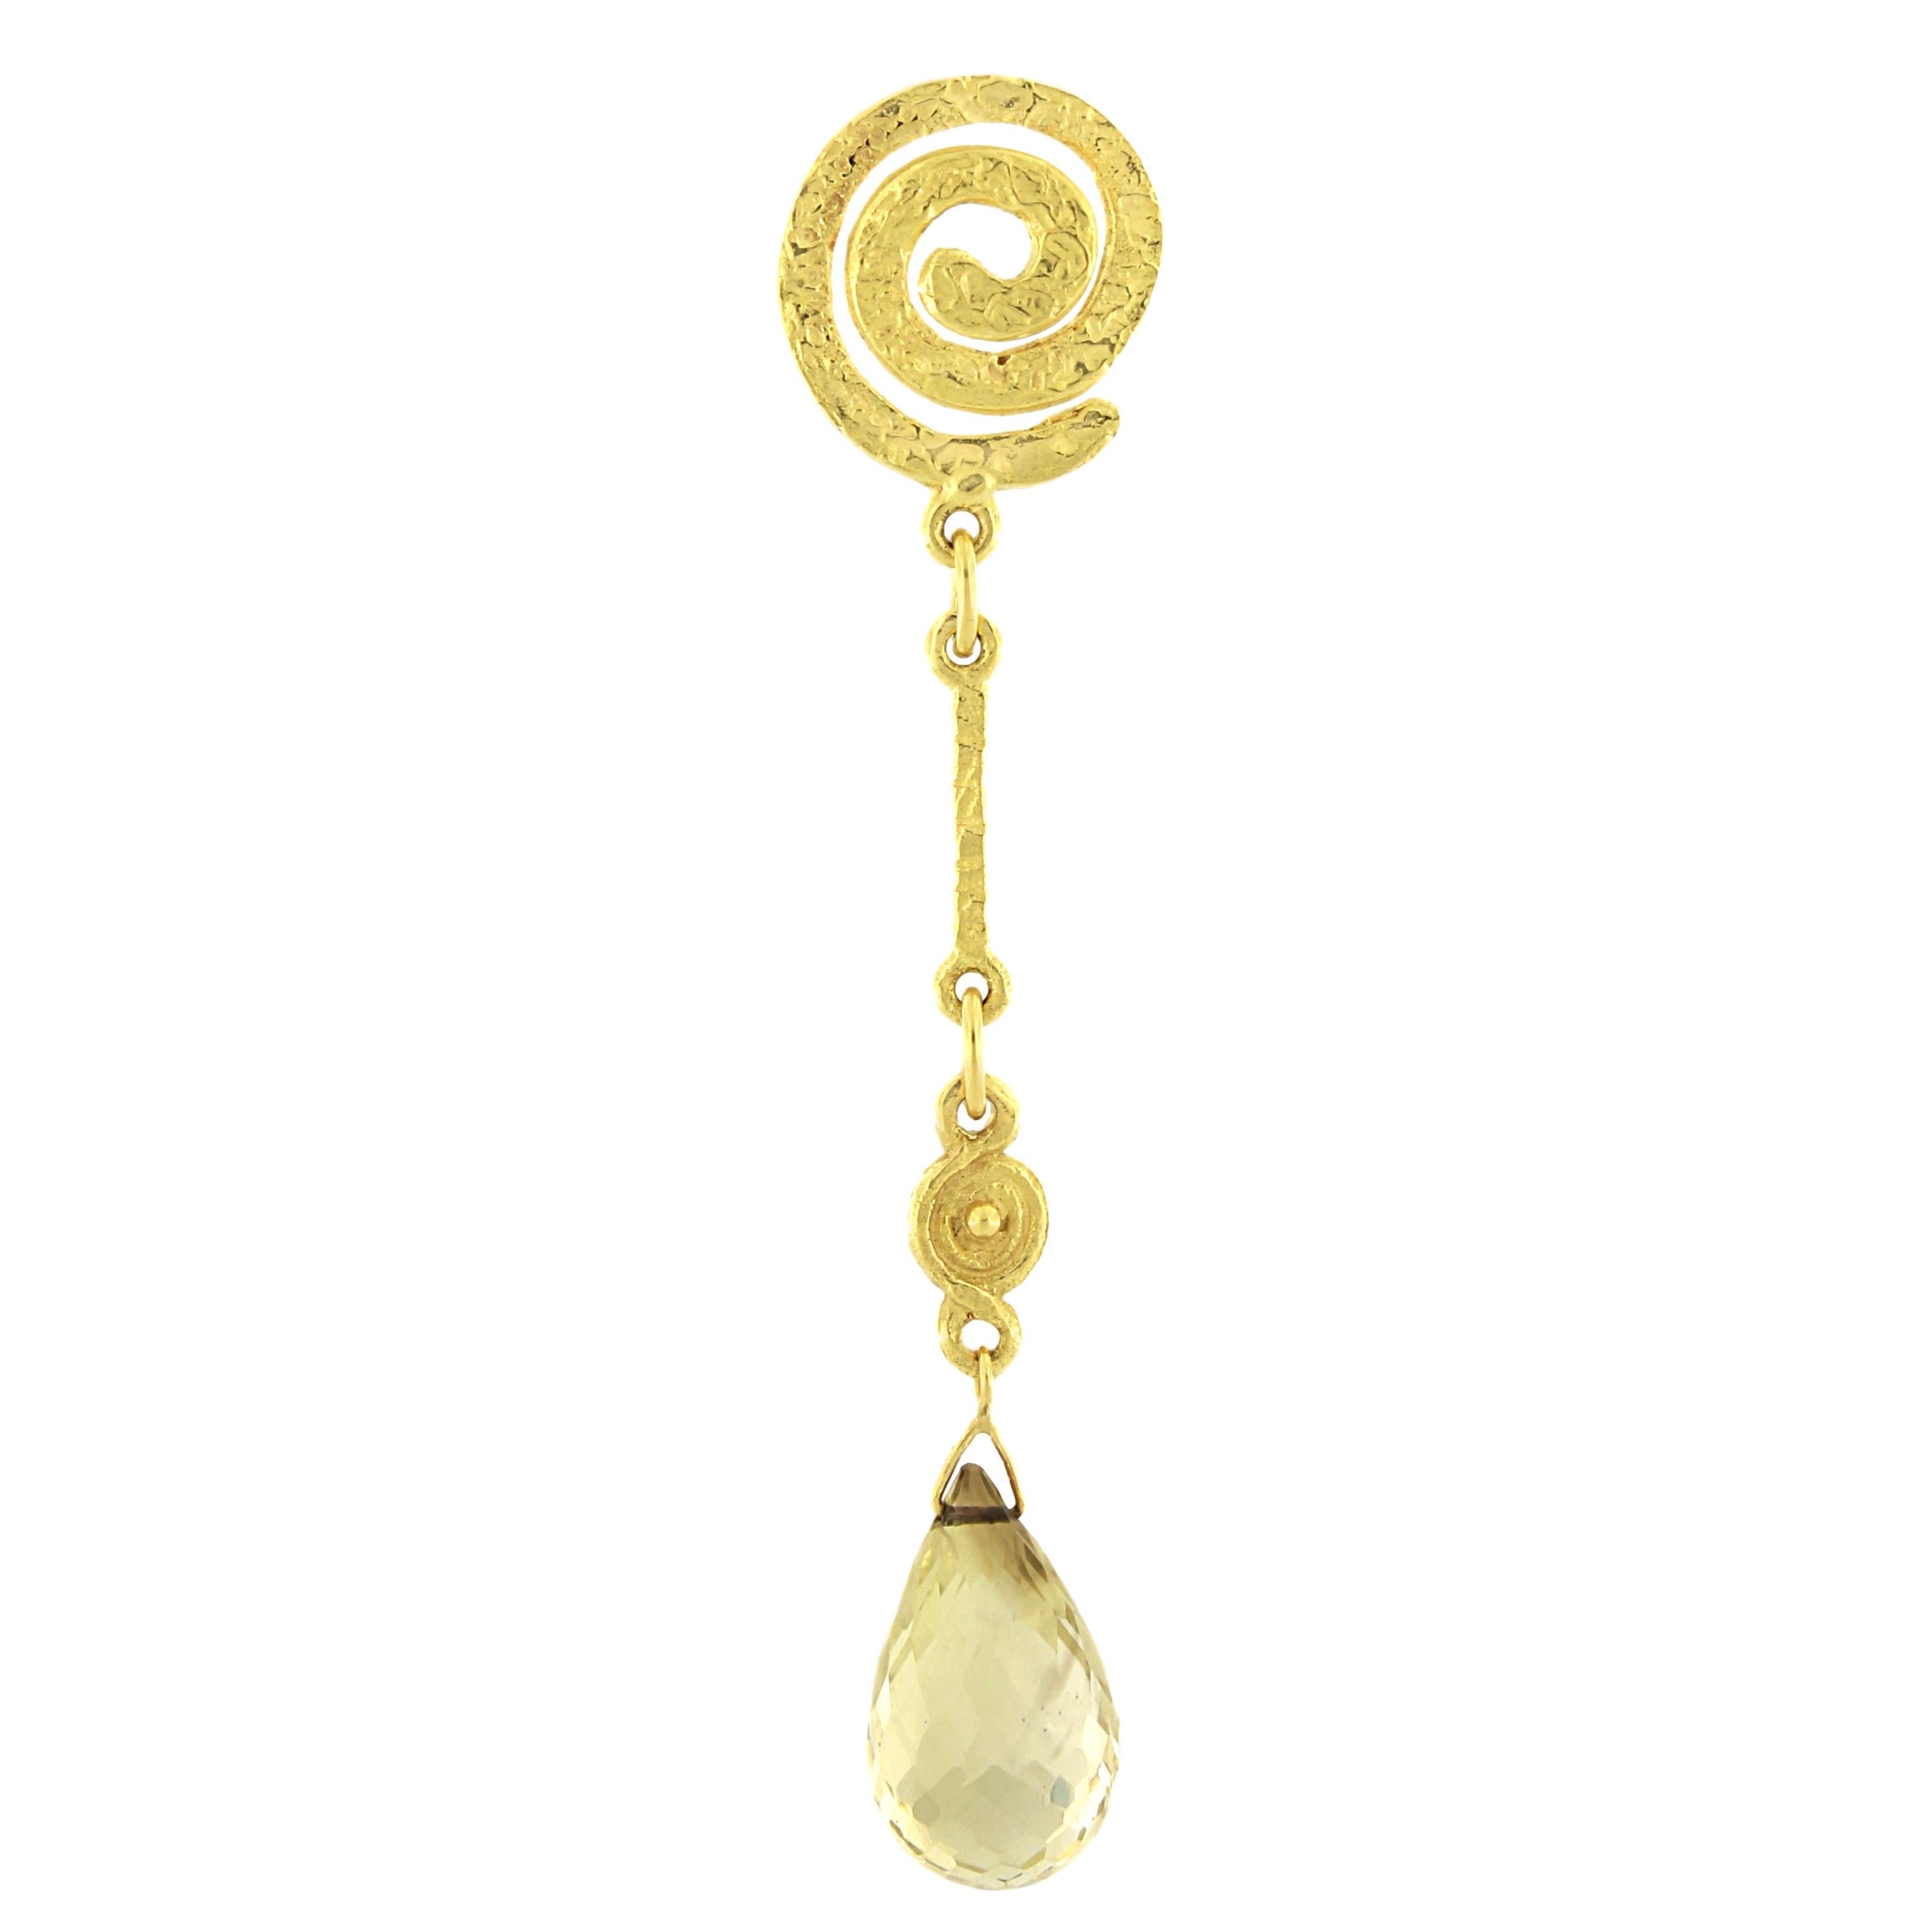 Lovely Green Amethyst 18 Karat Satin Yellow Gold Drop Earrings, from Sacchi's 